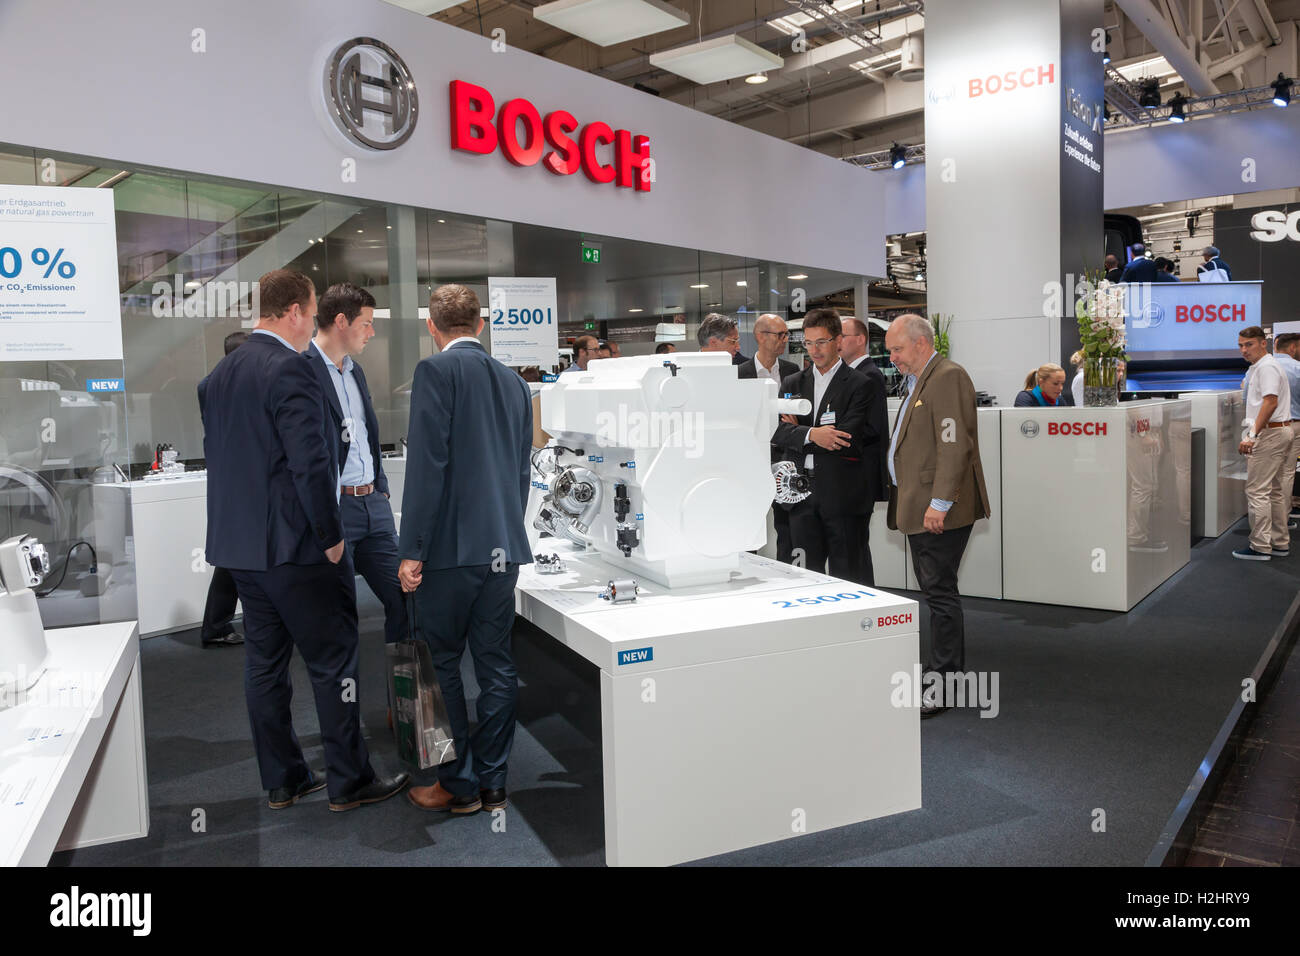 Booth of the german automotive supplier company Bosch Stock Photo